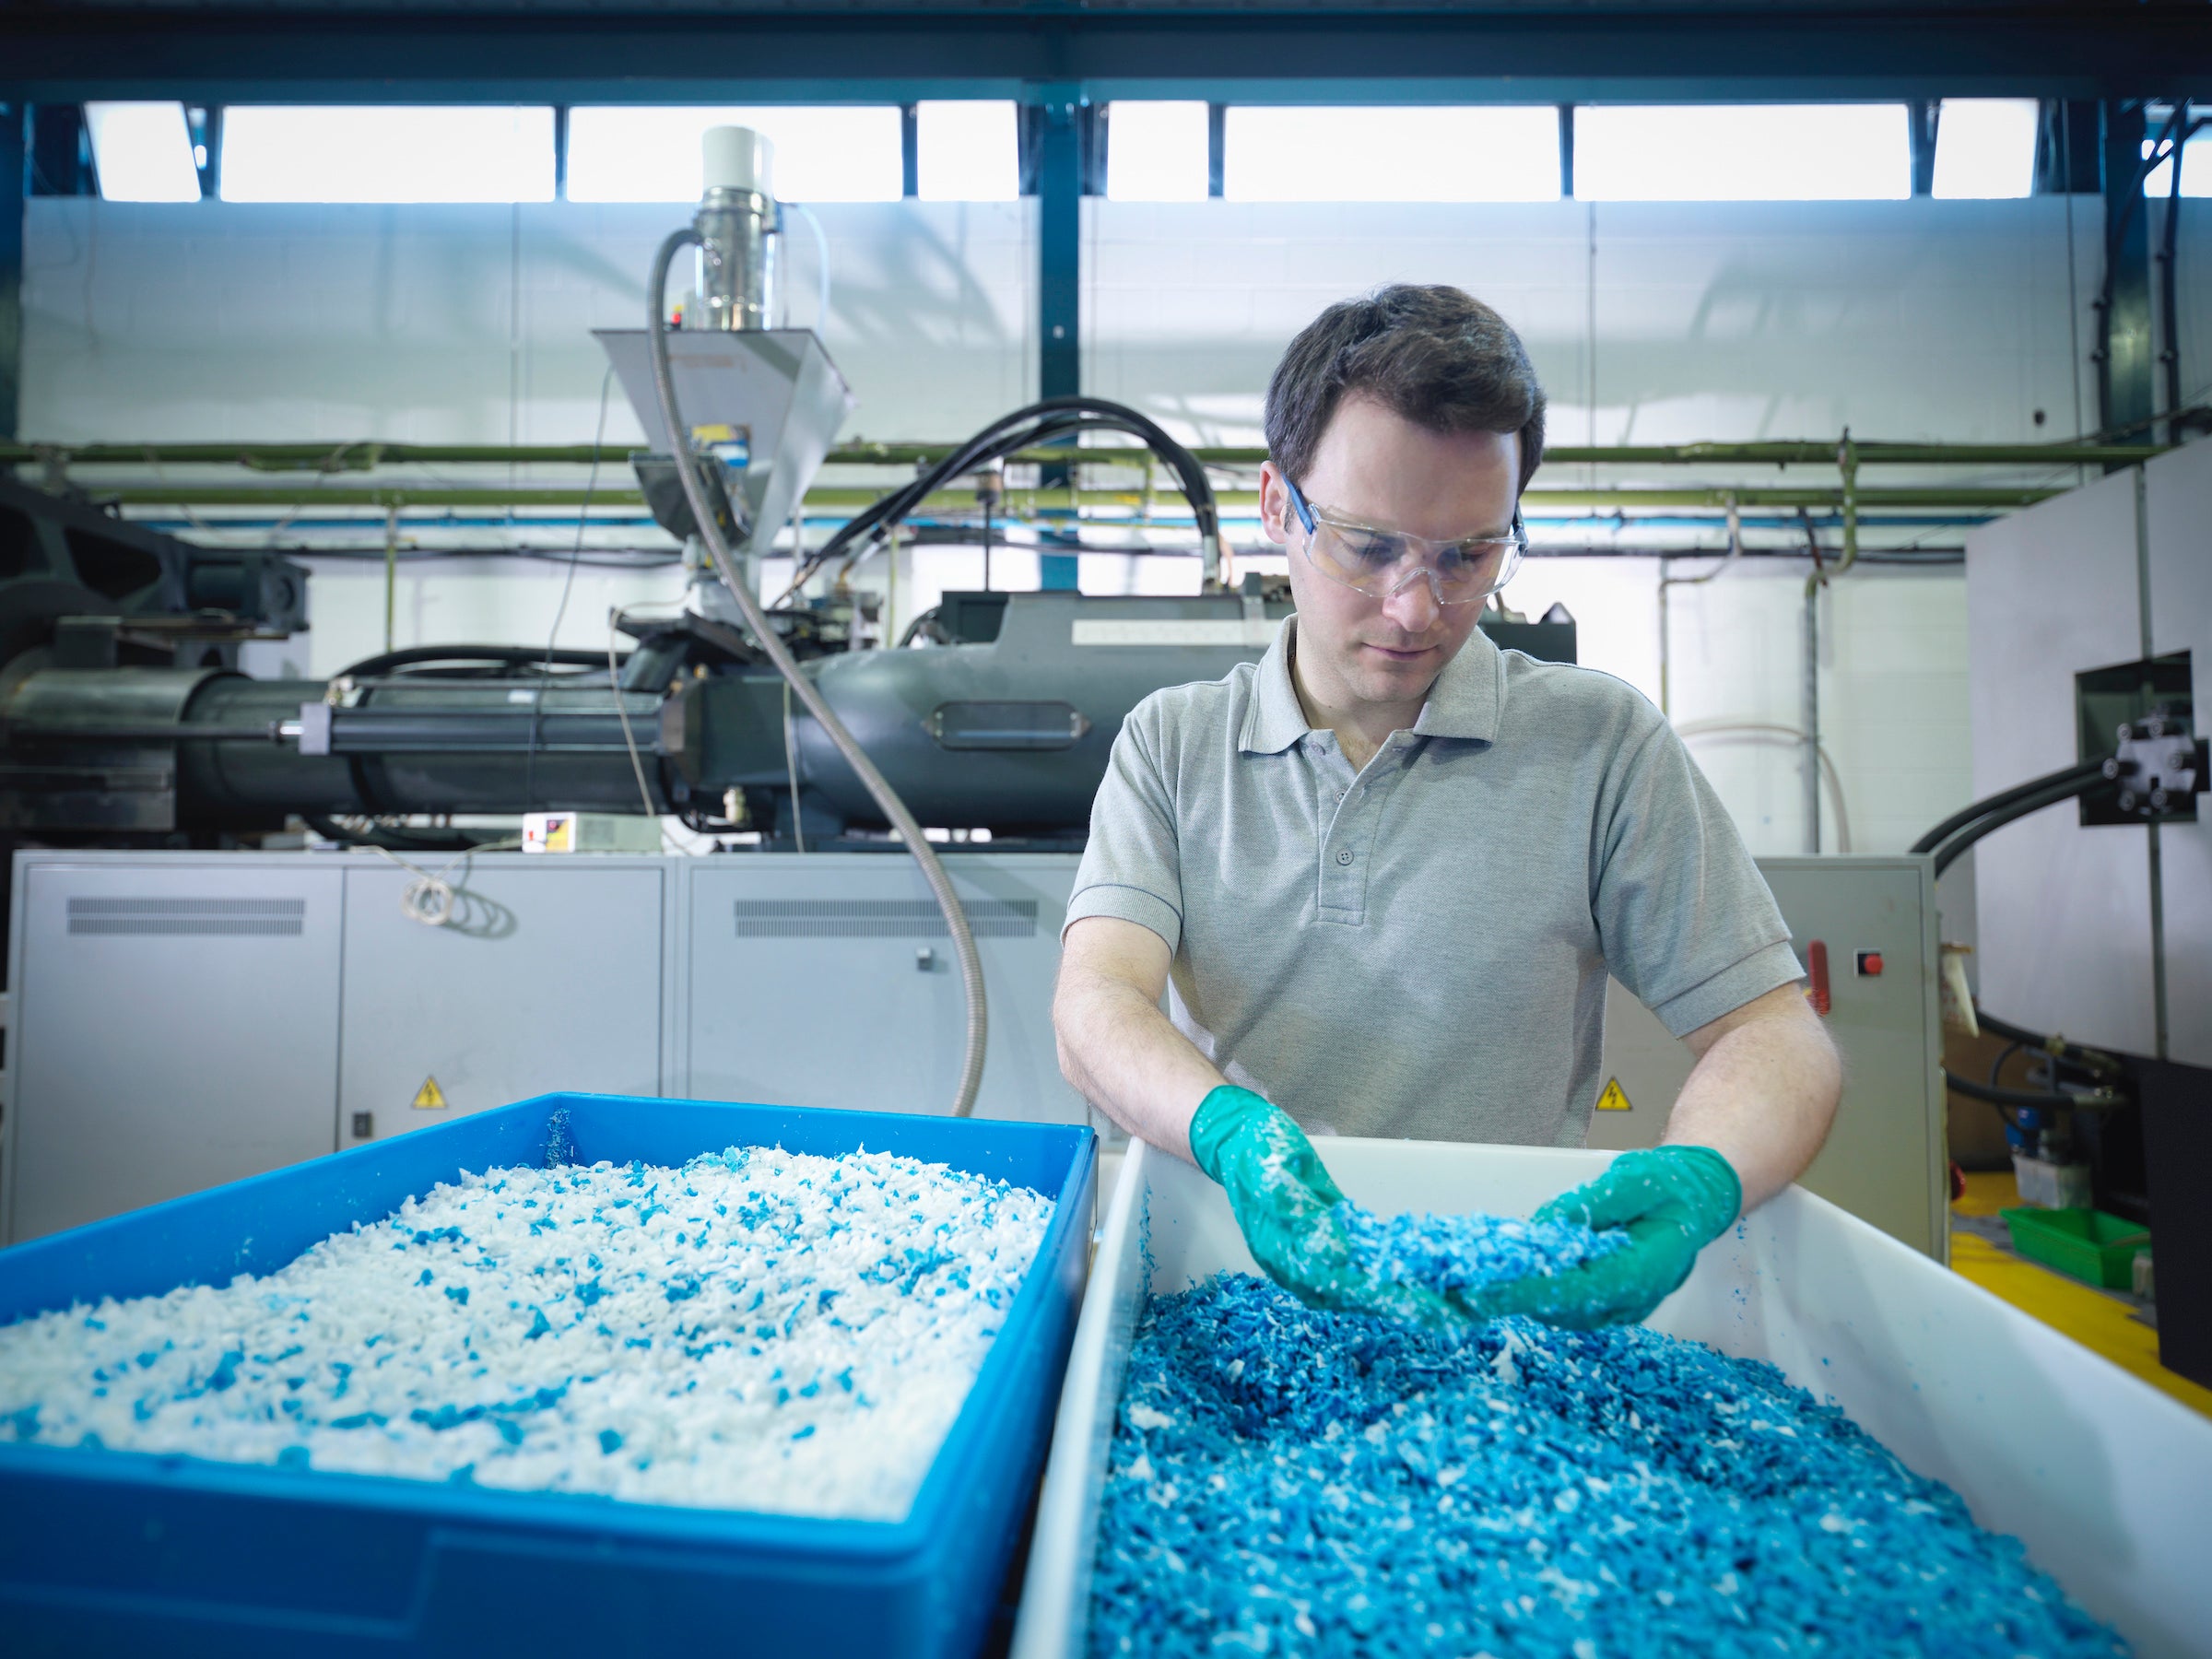 Worker sorts through resins for plastics manufacturing